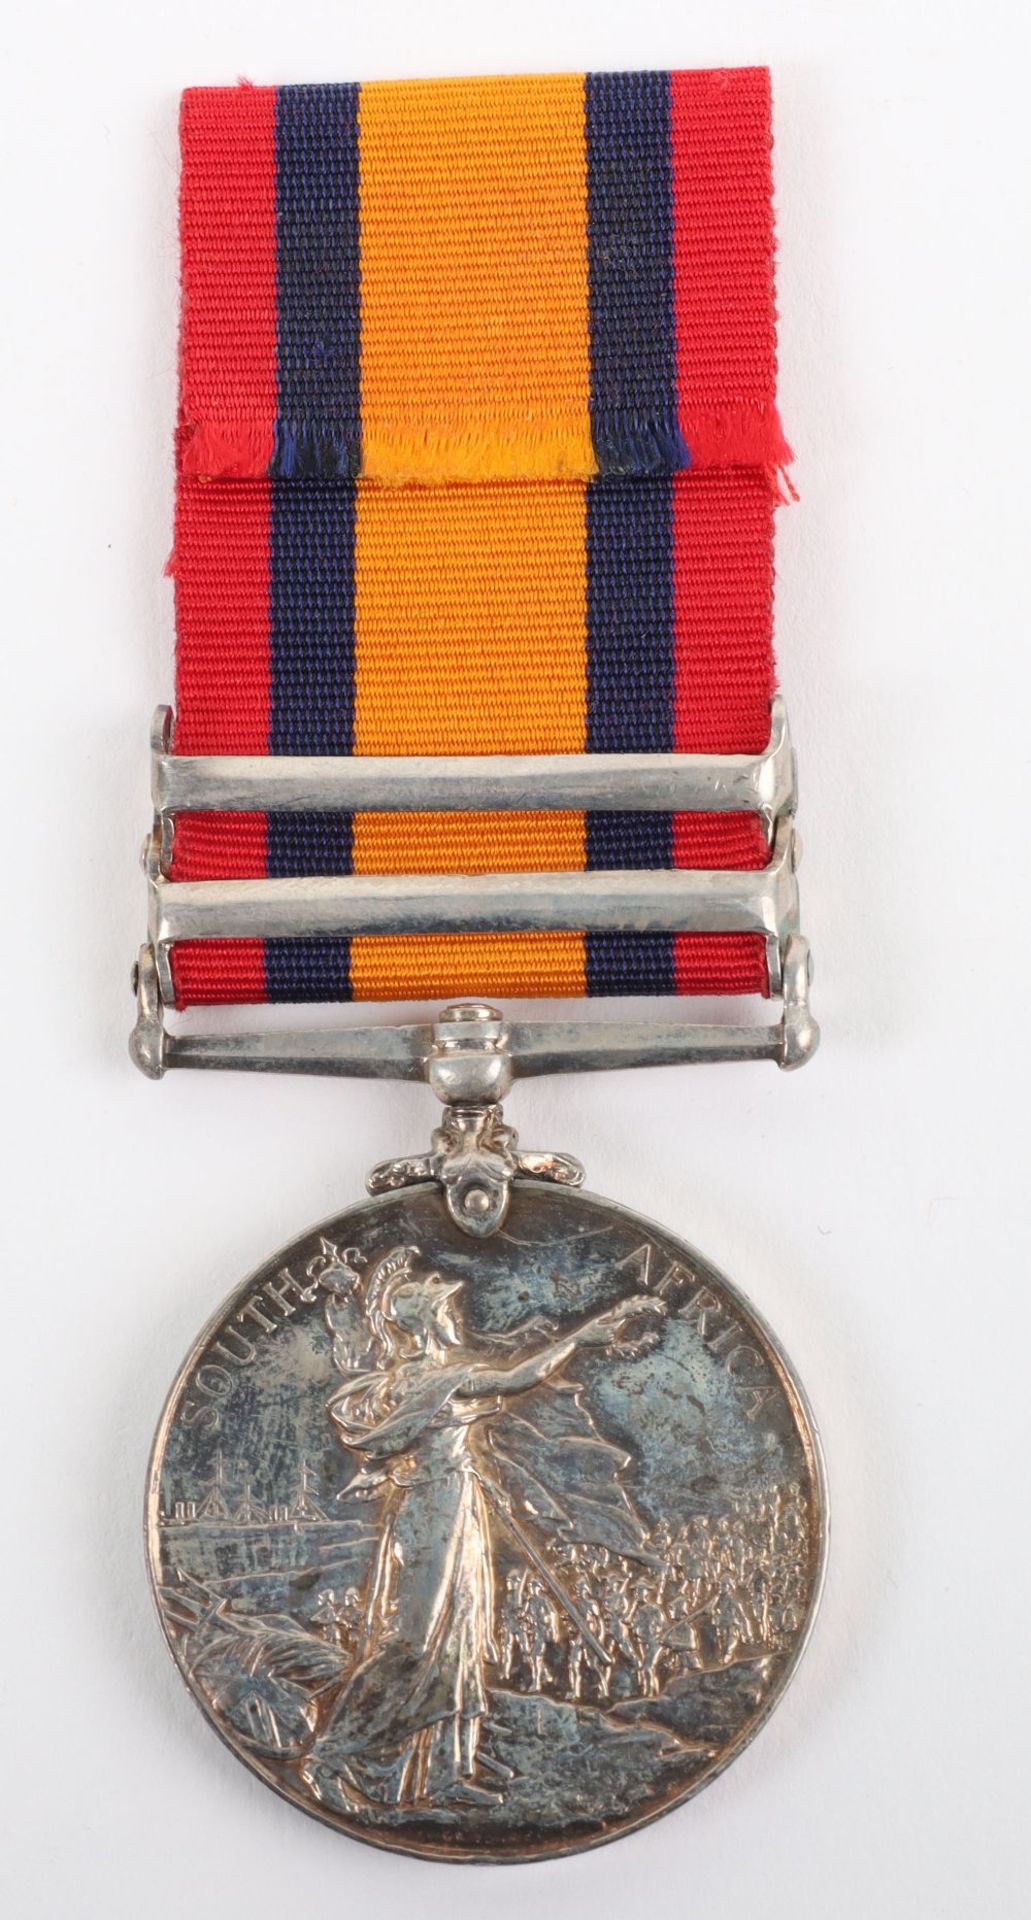 Queens South Africa Medal 4th Battalion the Durham Light Infantry - Image 2 of 4